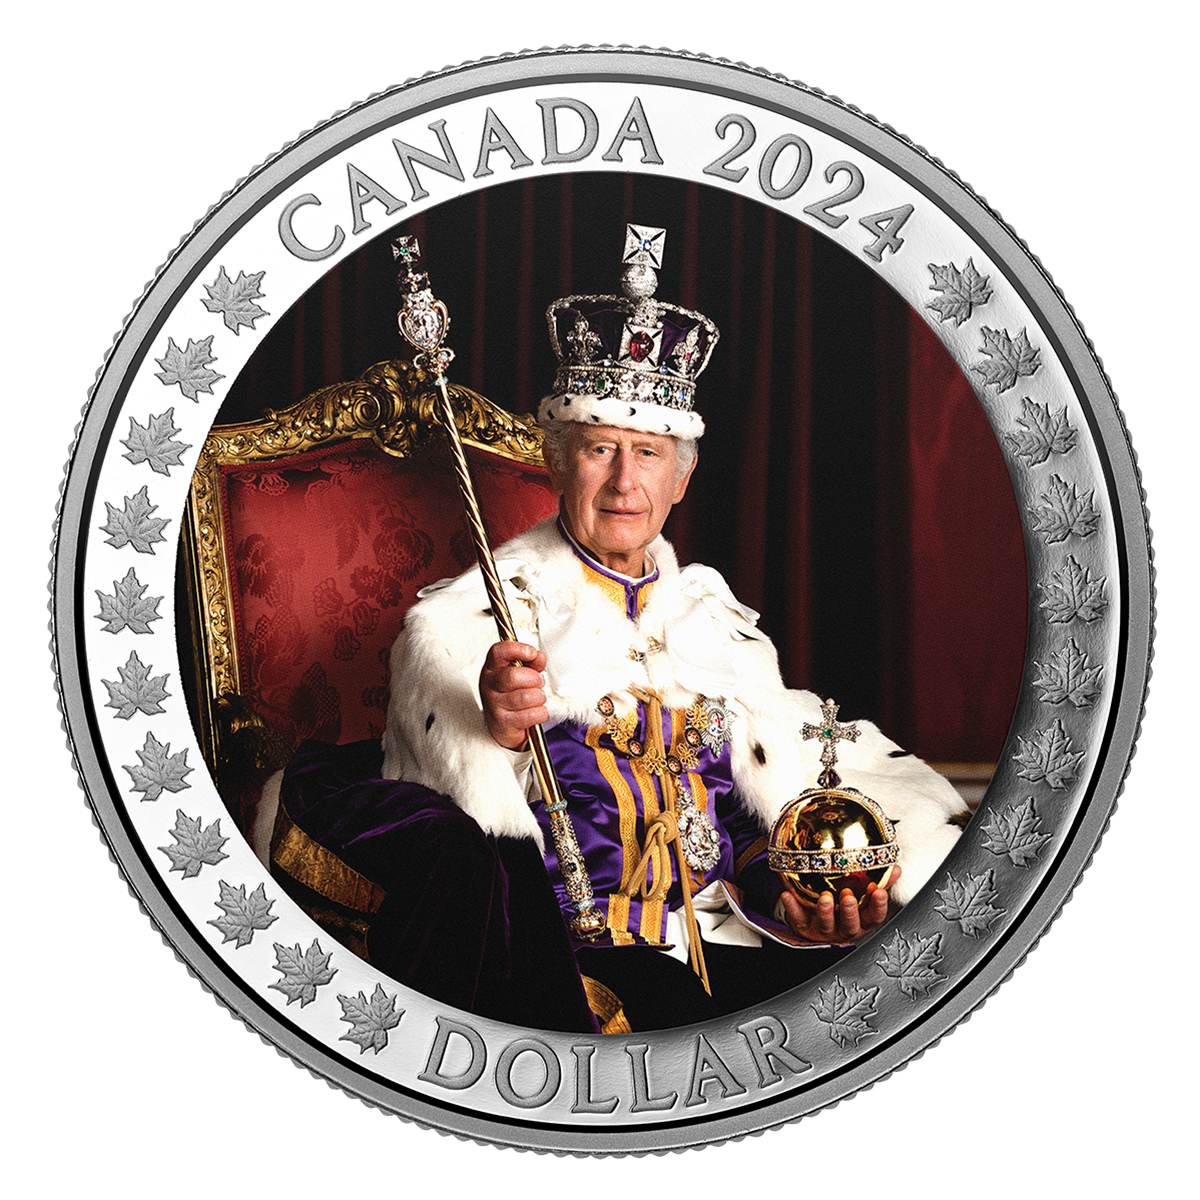 Special Edition Proof Silver Dollar – Anniversary of His Majesty King Charles III’s Coronation